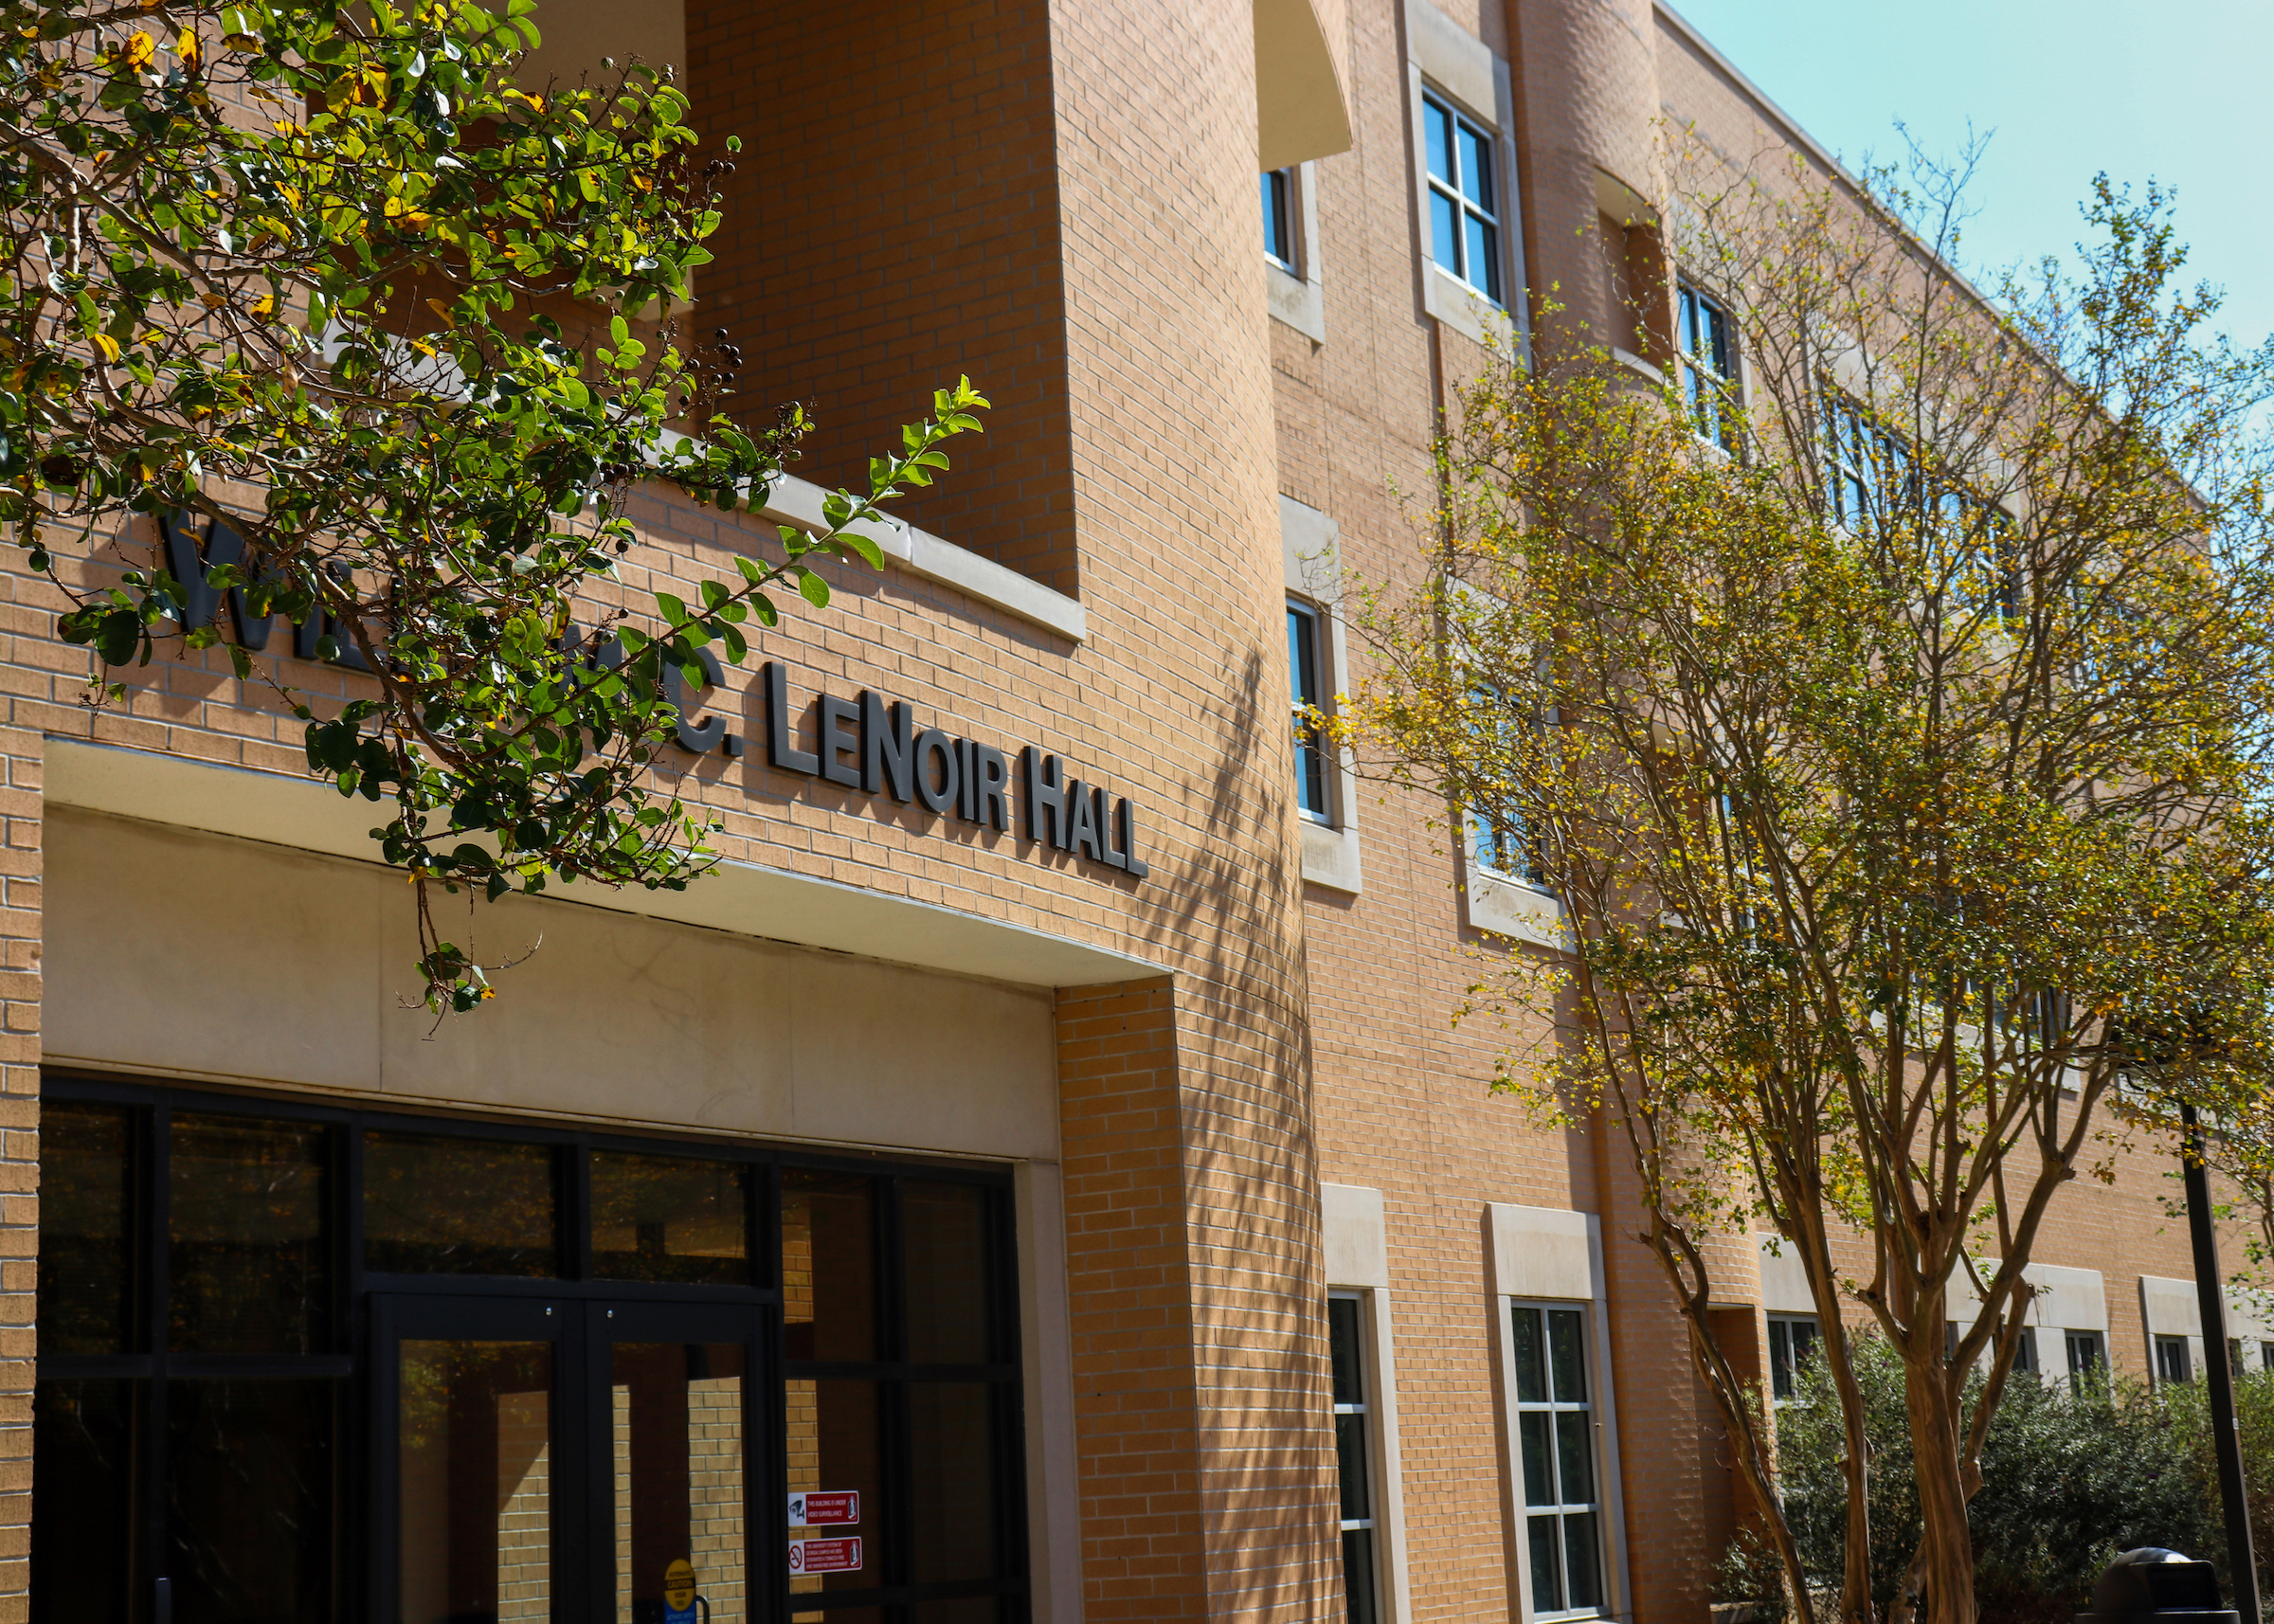 Building with signage that reads Lenoir Hall.